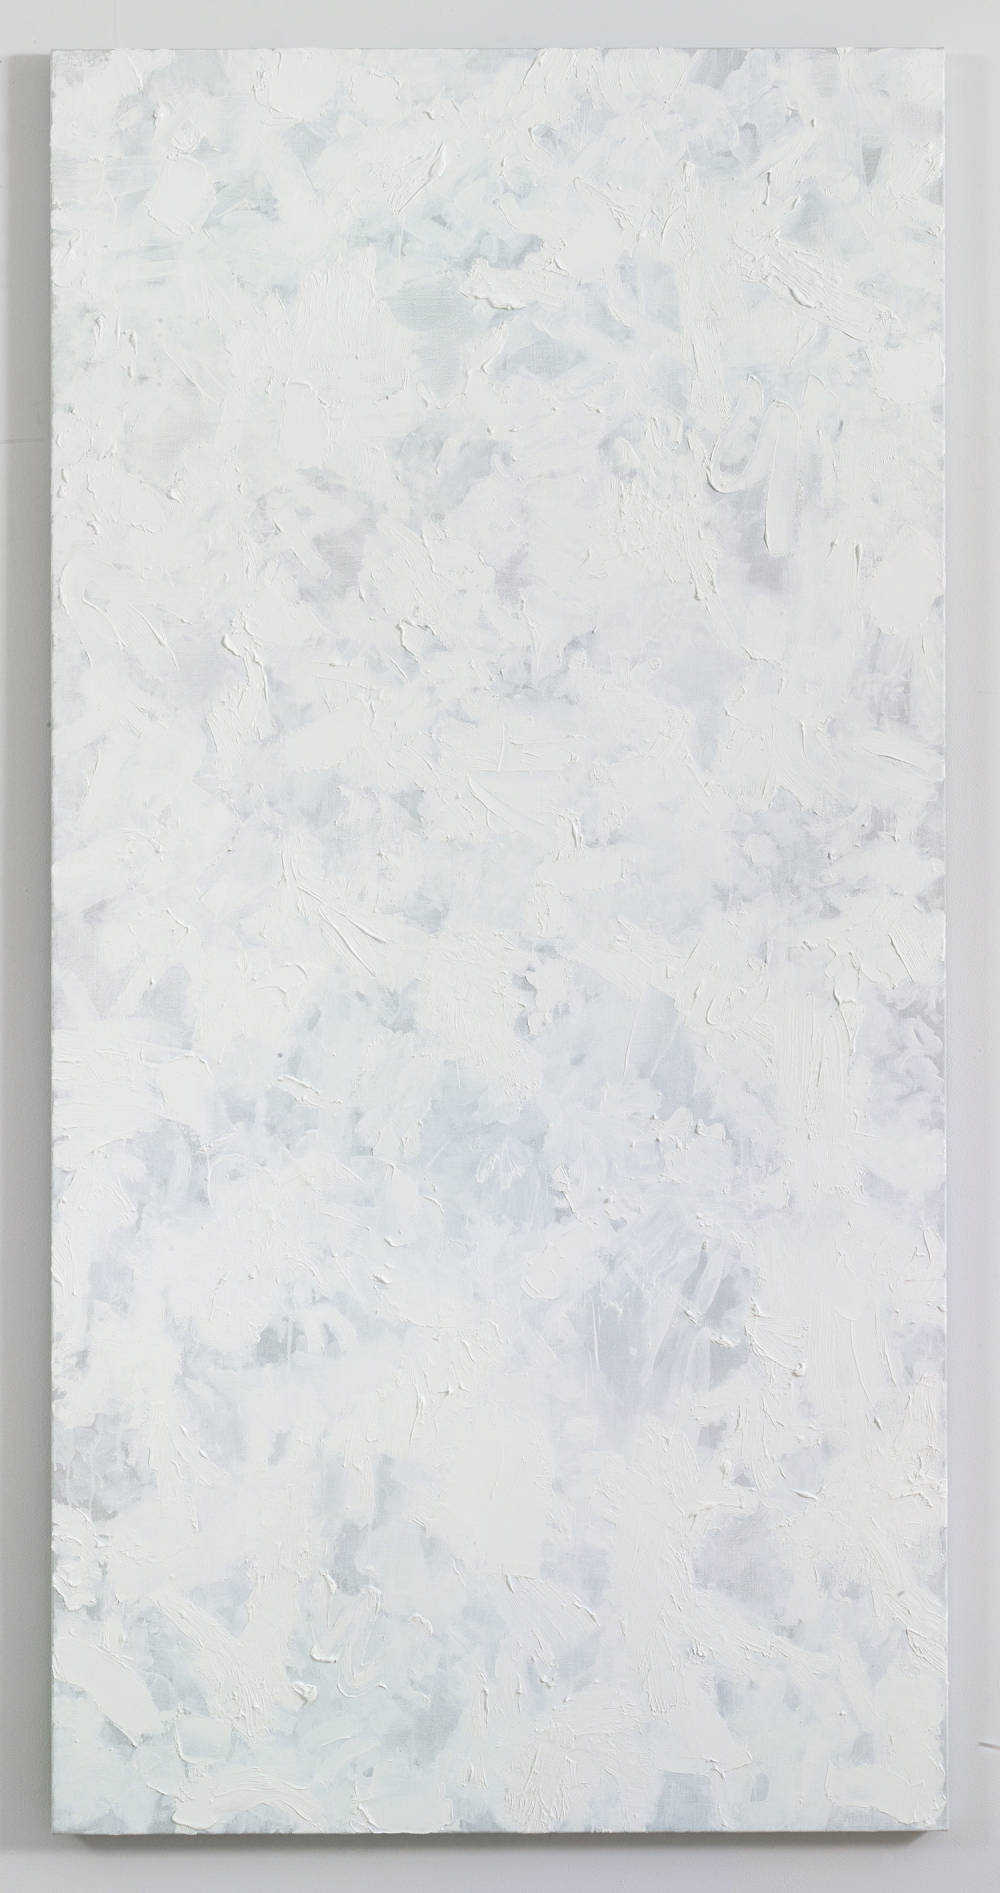 A large abstract painting with numerous swatches of white paint on top of one another. The paint is applied in thin layers .